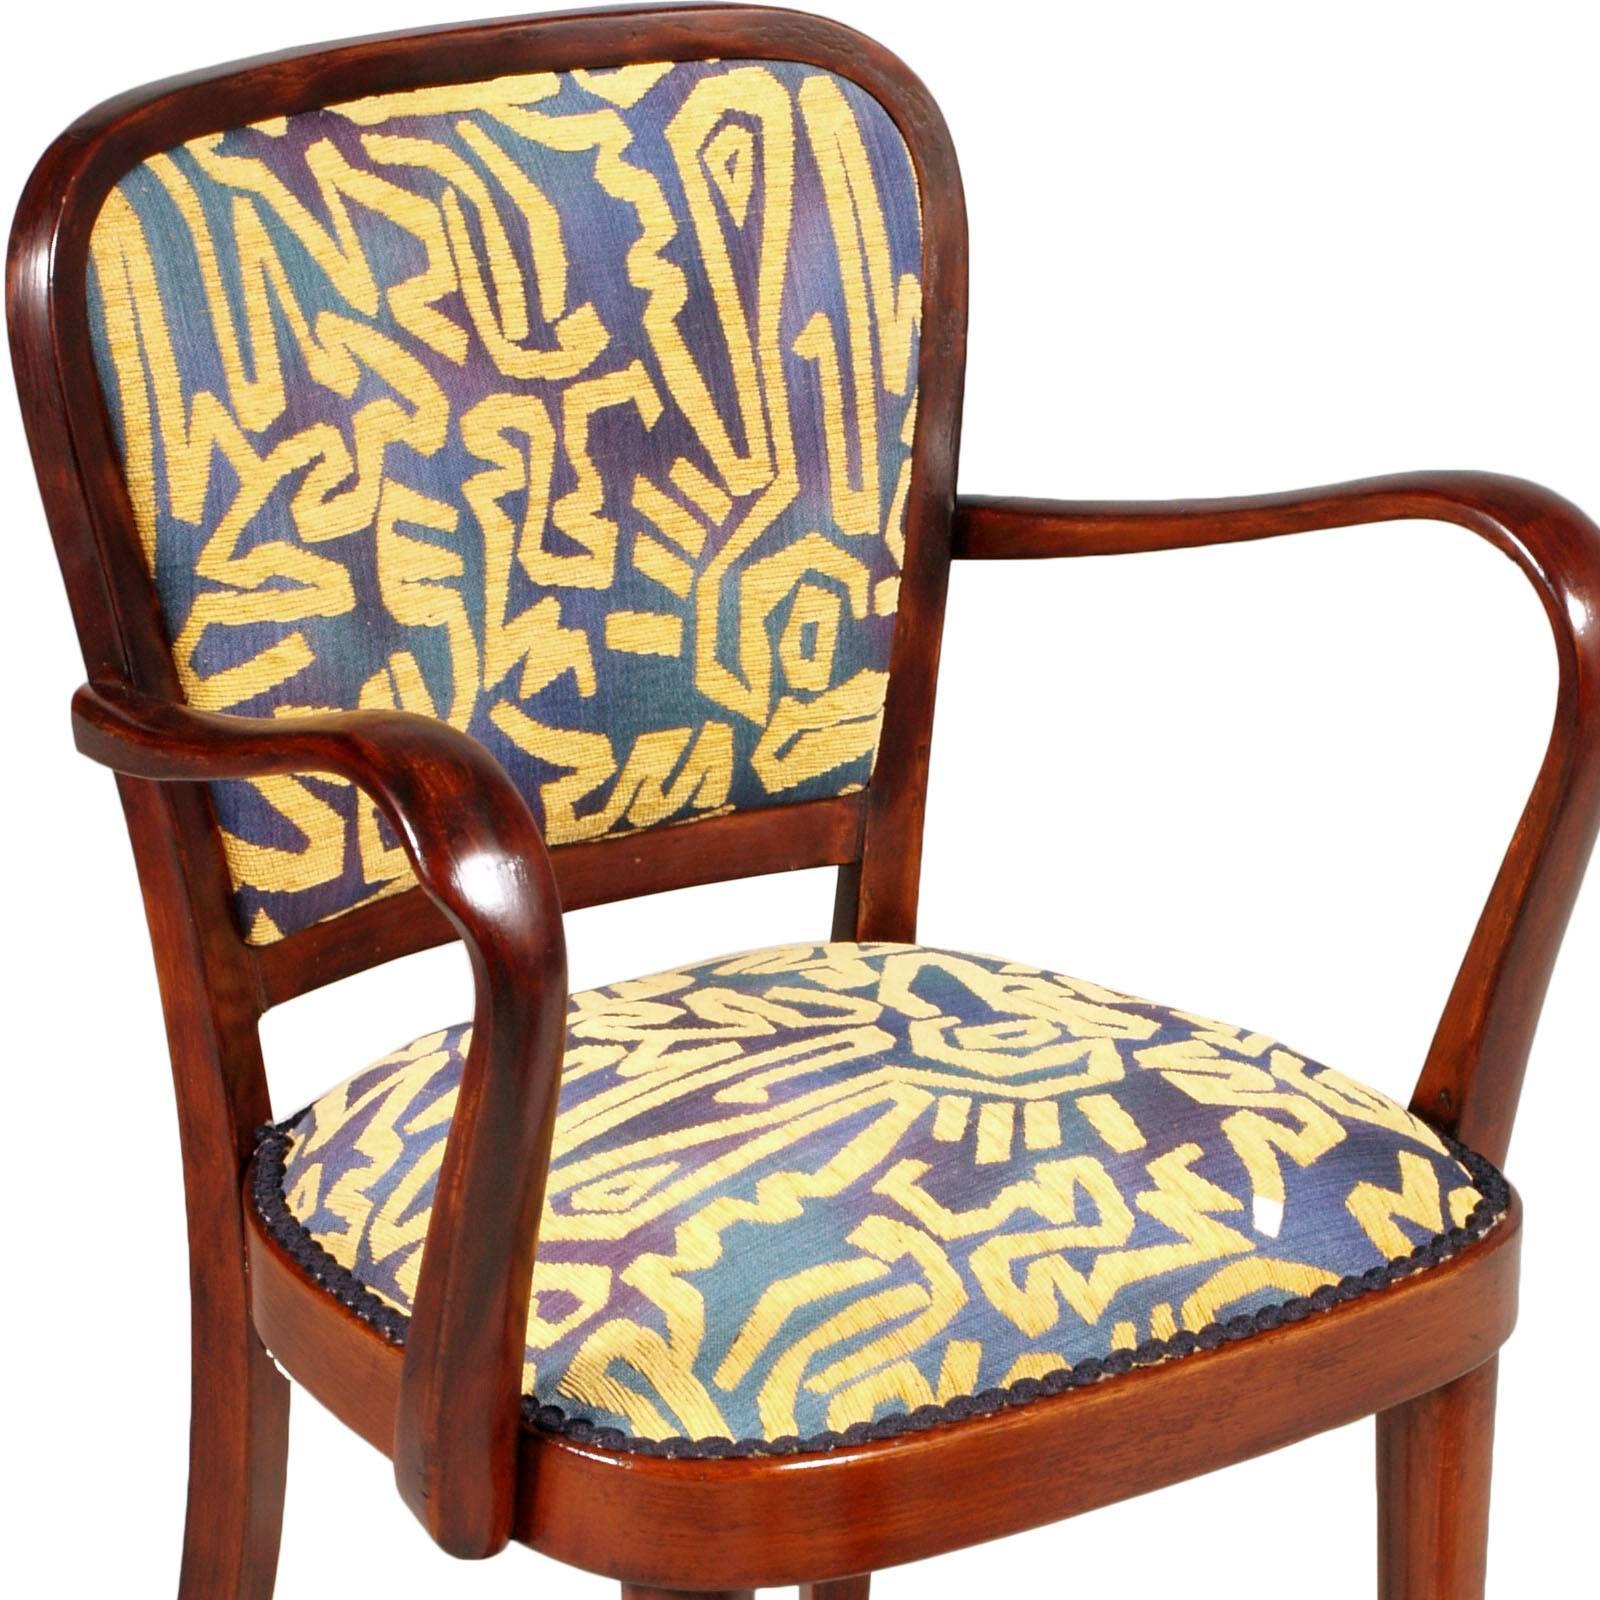 Mid-Century Modern Gio Ponti attributed armchair, walnut, restored, finished to wax.
New upholstered with Wharol Haring fabric. Excellent conditions.

Measures cm: H 85/48, W 57, D 53.